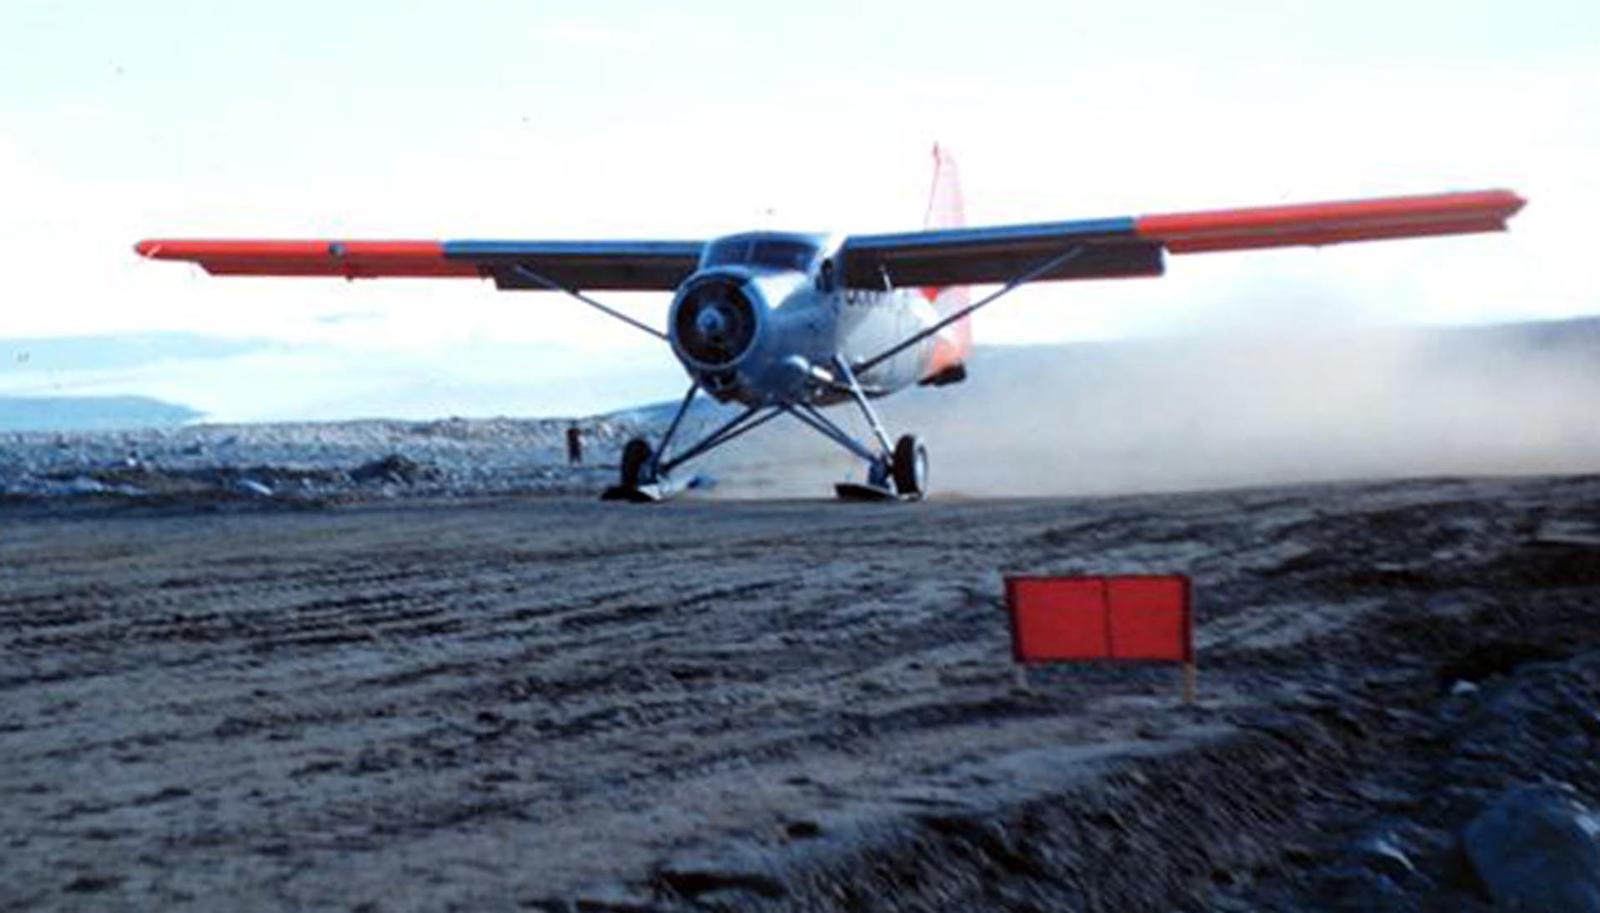 Old-style plane lands on dirt runway.